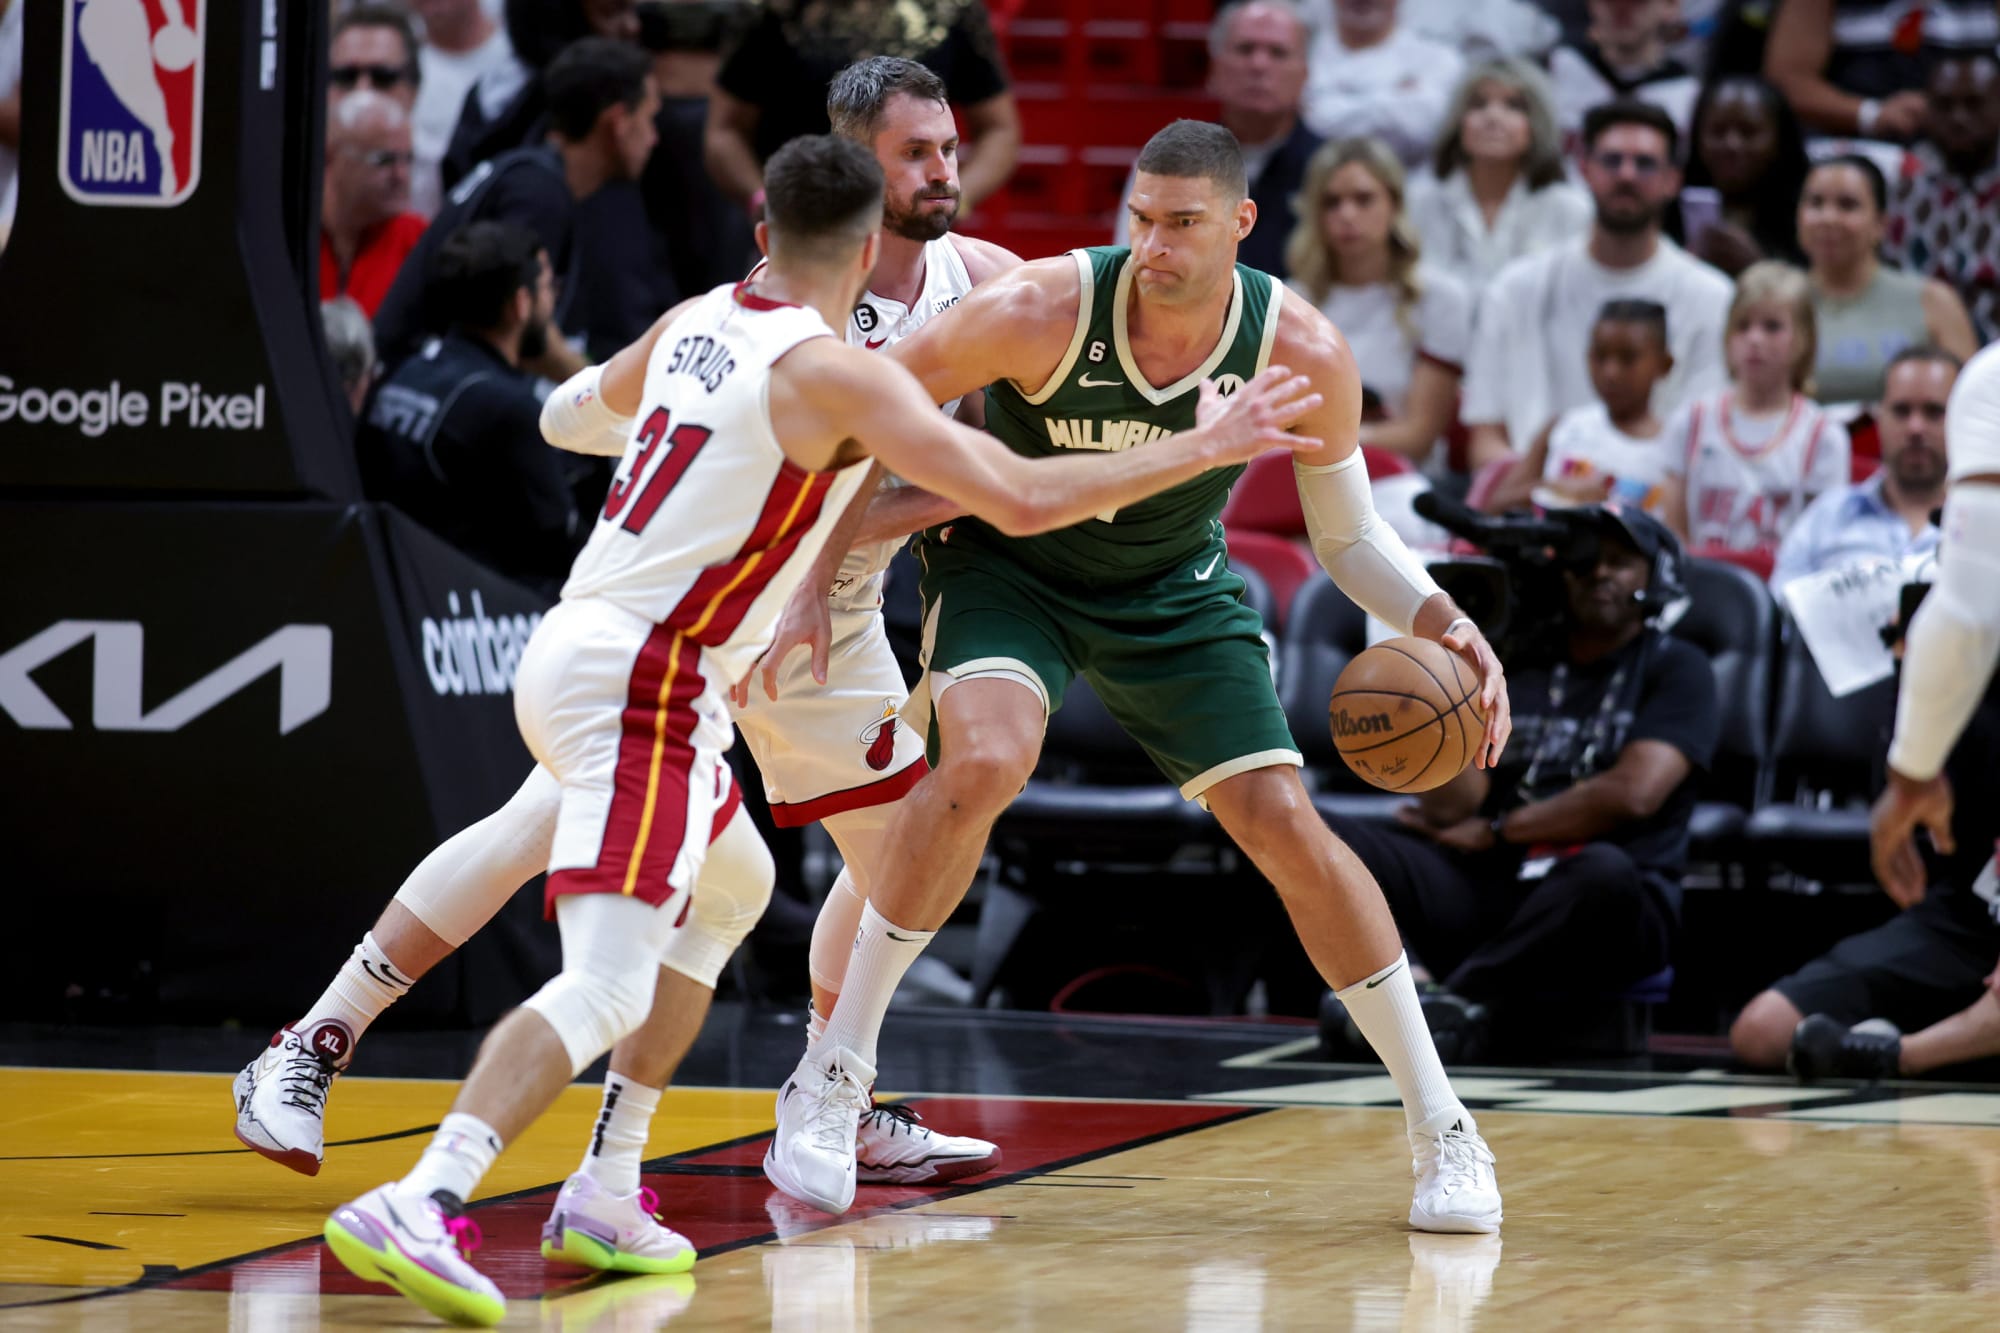 Brook Lopez is turning up the heat against the Miami Heat in the NBA Playoffs